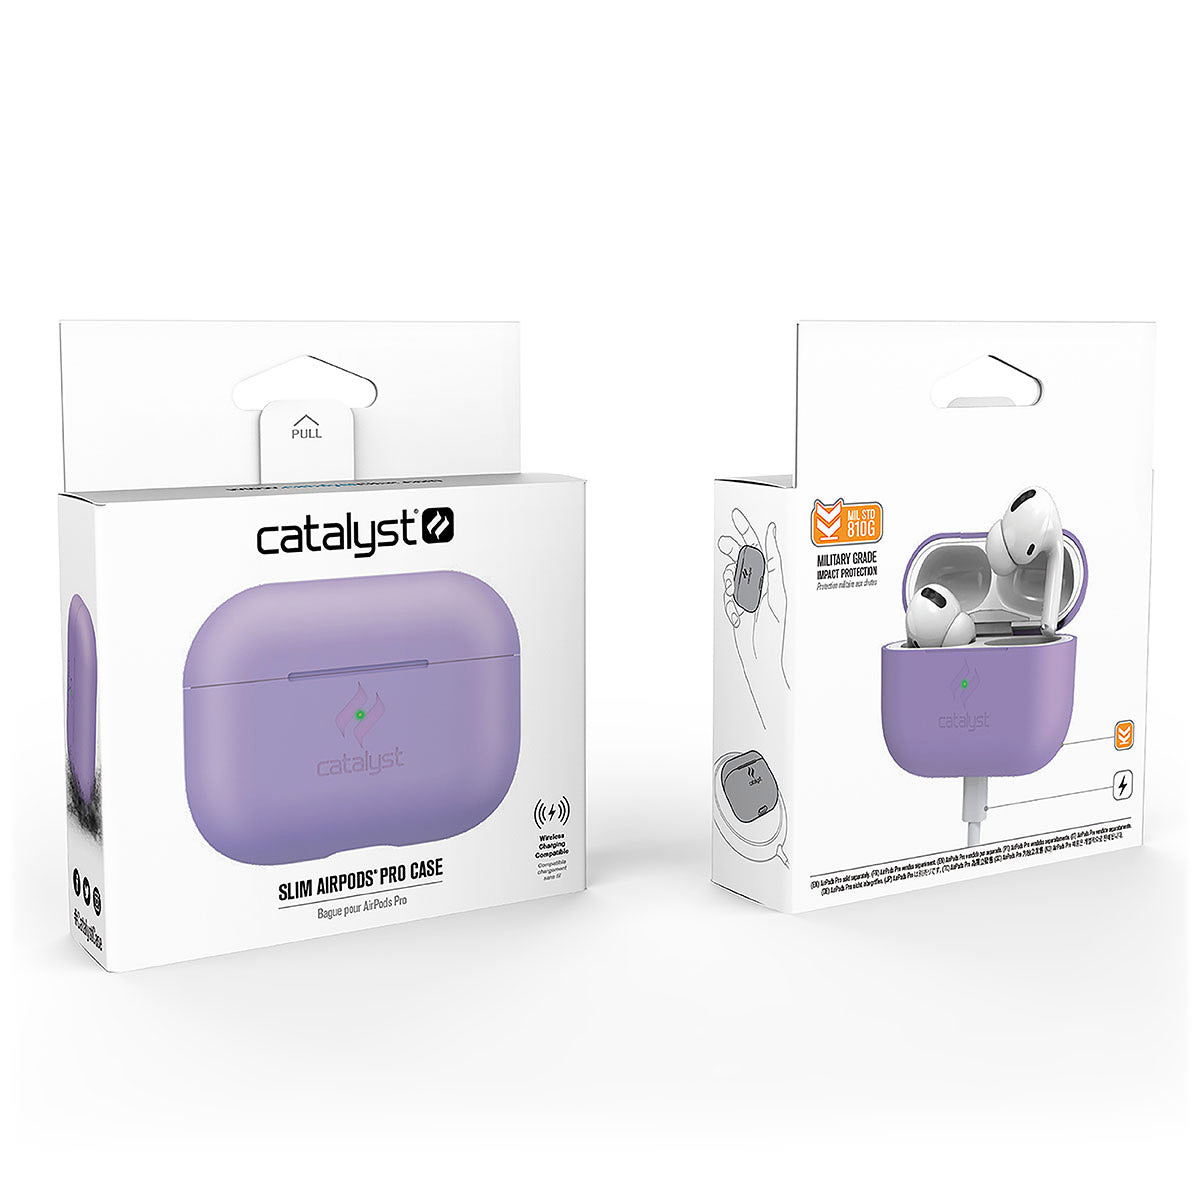 Catalyst airpods pro gen 2/1 slim case showing the front and back view of the packaging in a lilac colorway